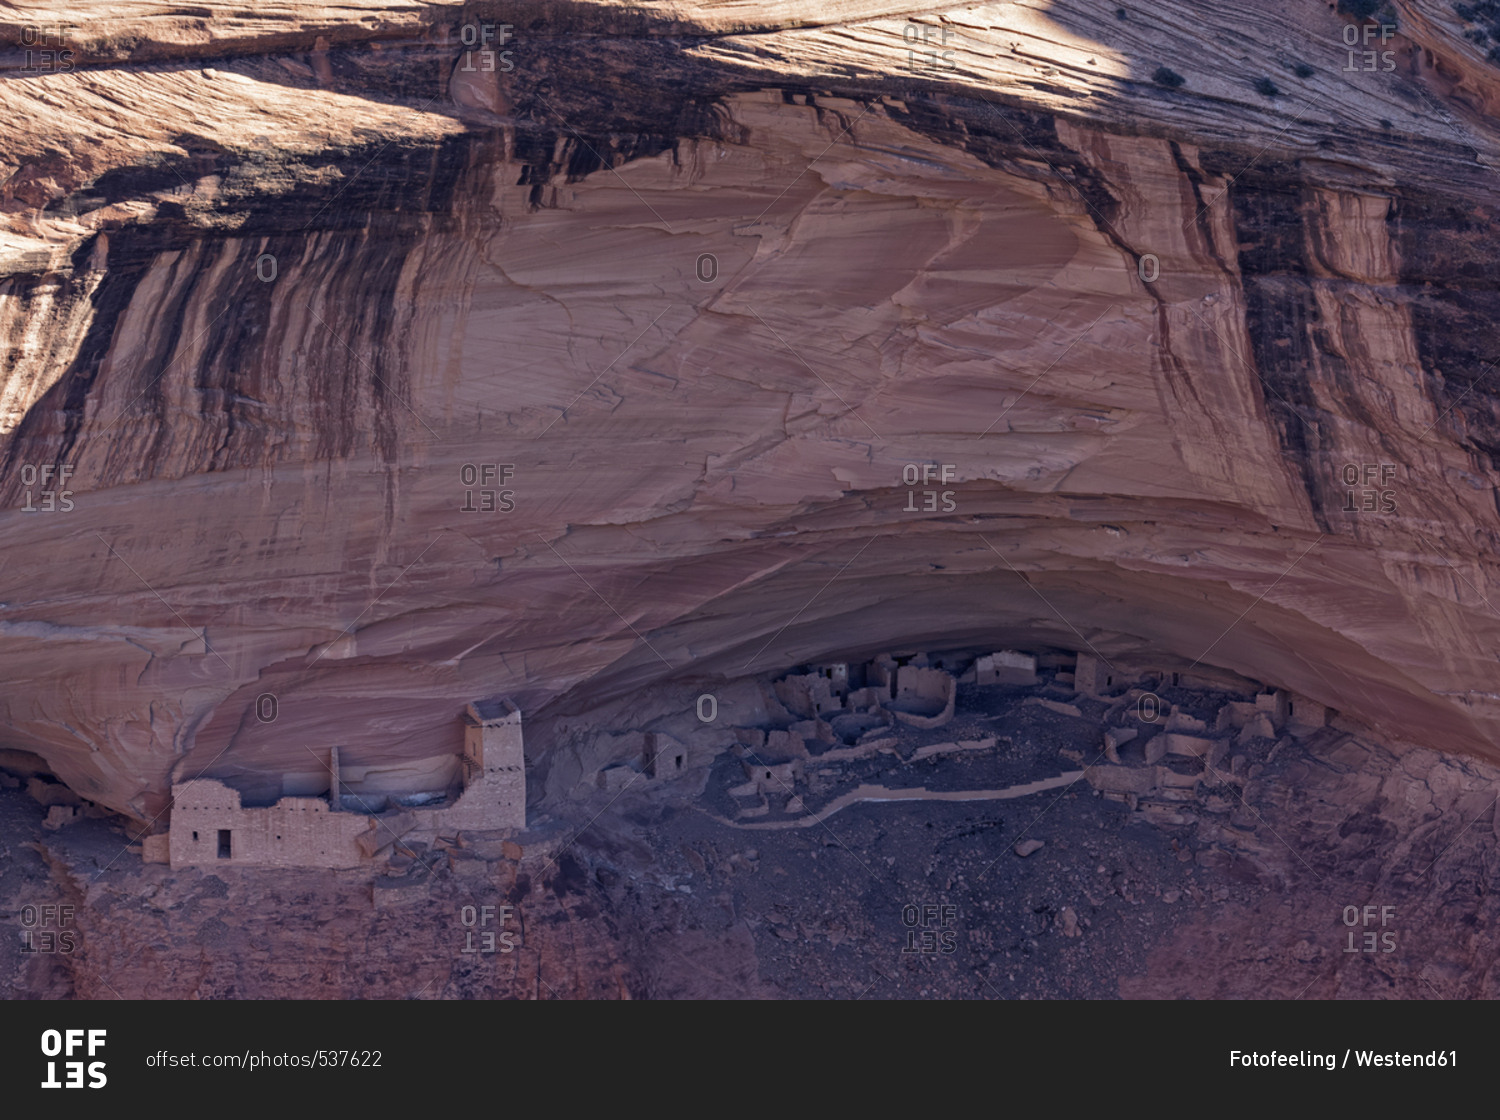 USA - Arizona - Canyon de Chelly National Monument - Canyon del Muerto - Mummy Cave - ruins of Pueblo Indians